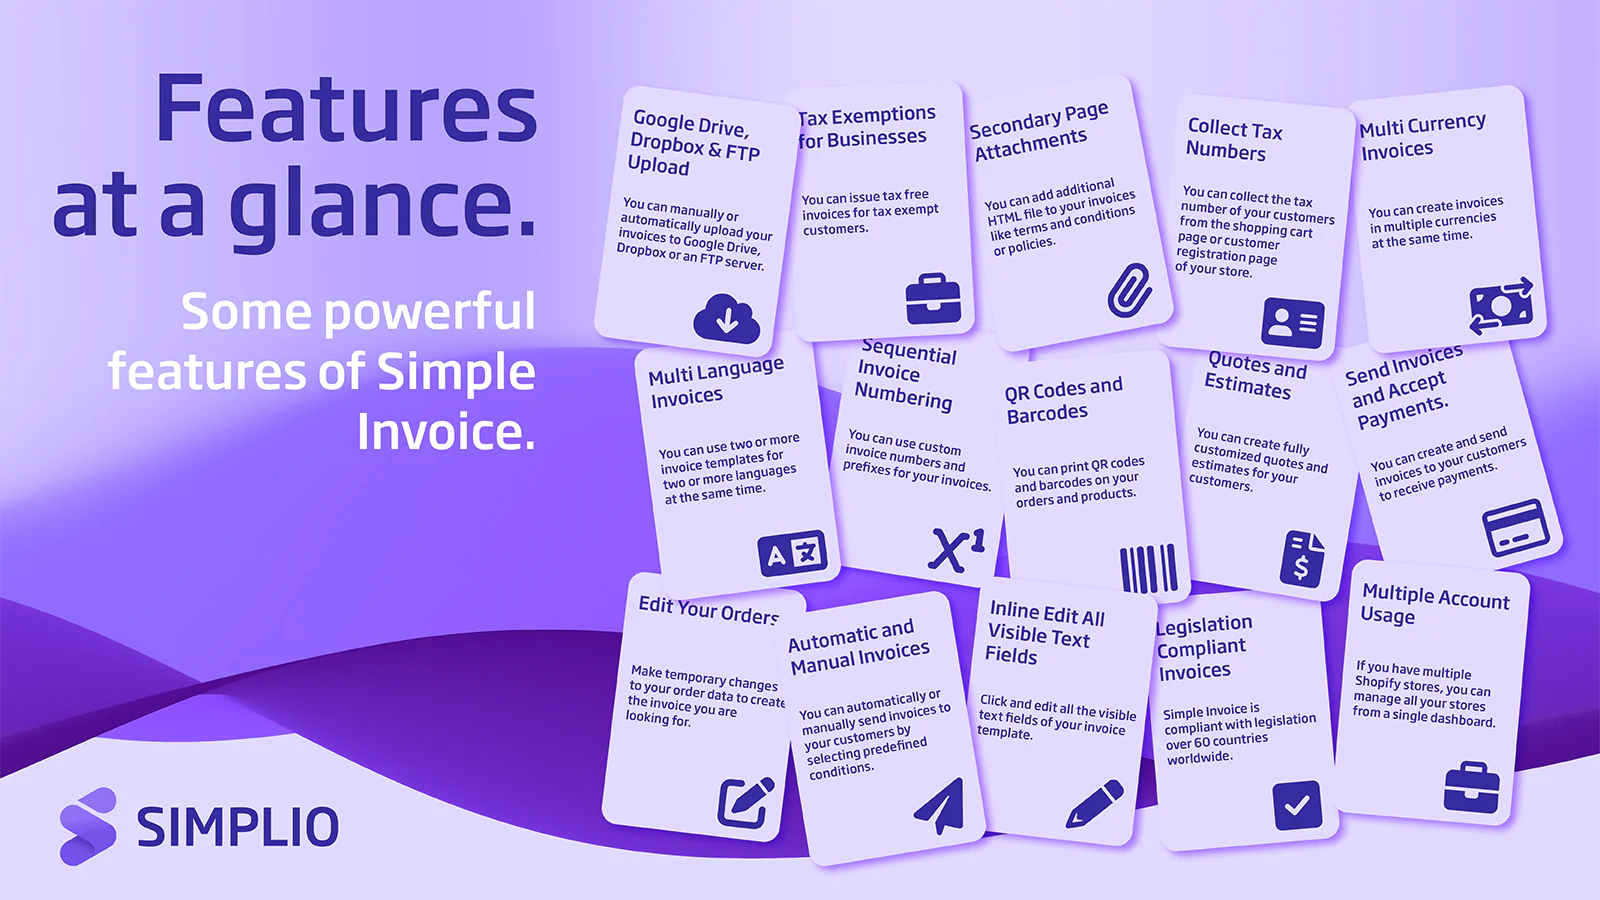 See all features of Simple Invoice at once.